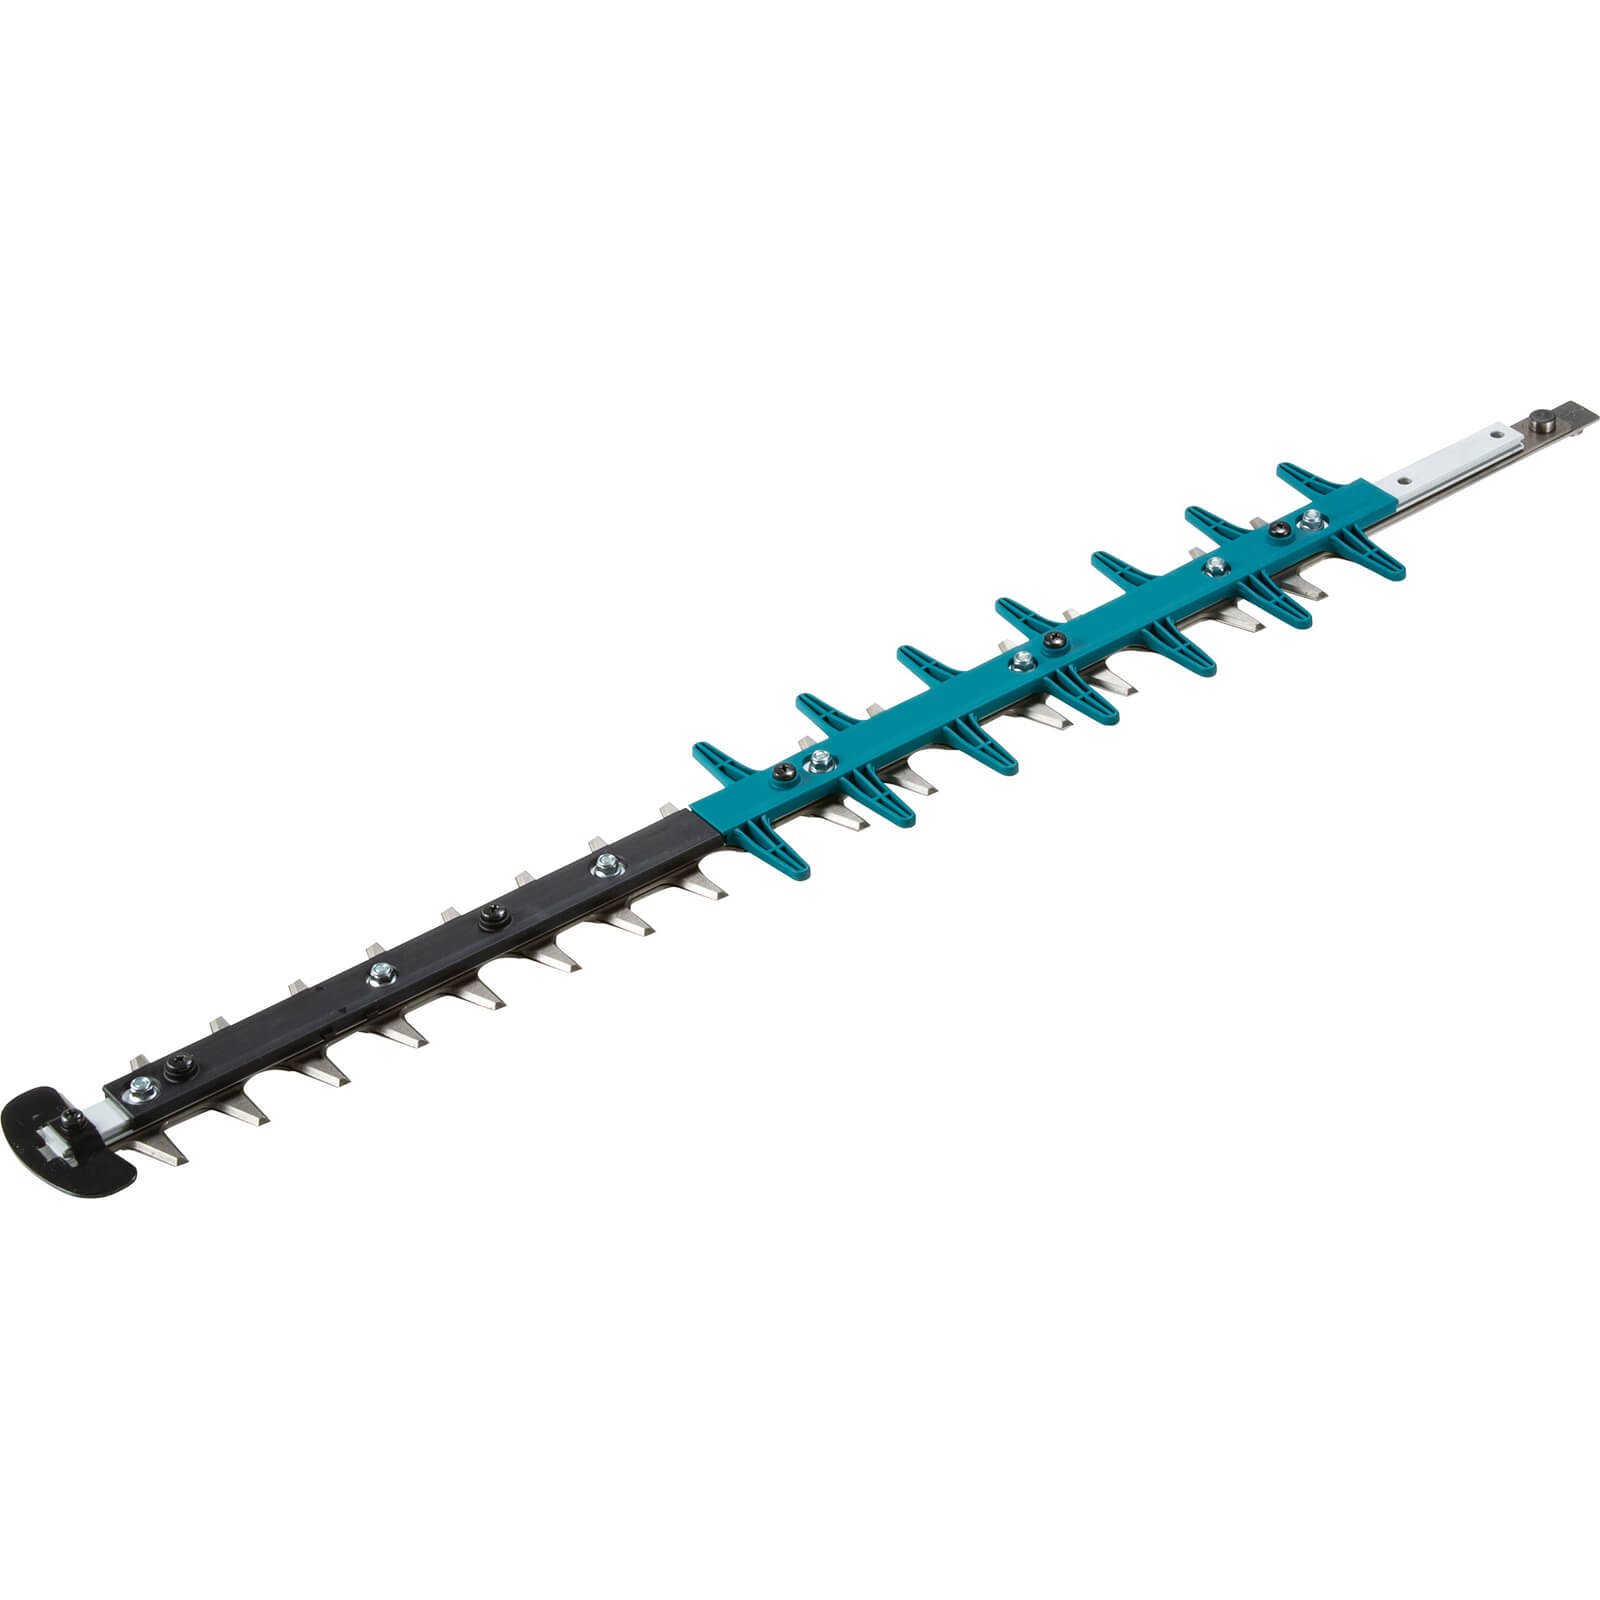 Image of Makita Shear Blade 600 Set for UH004G Hedge Trimmer